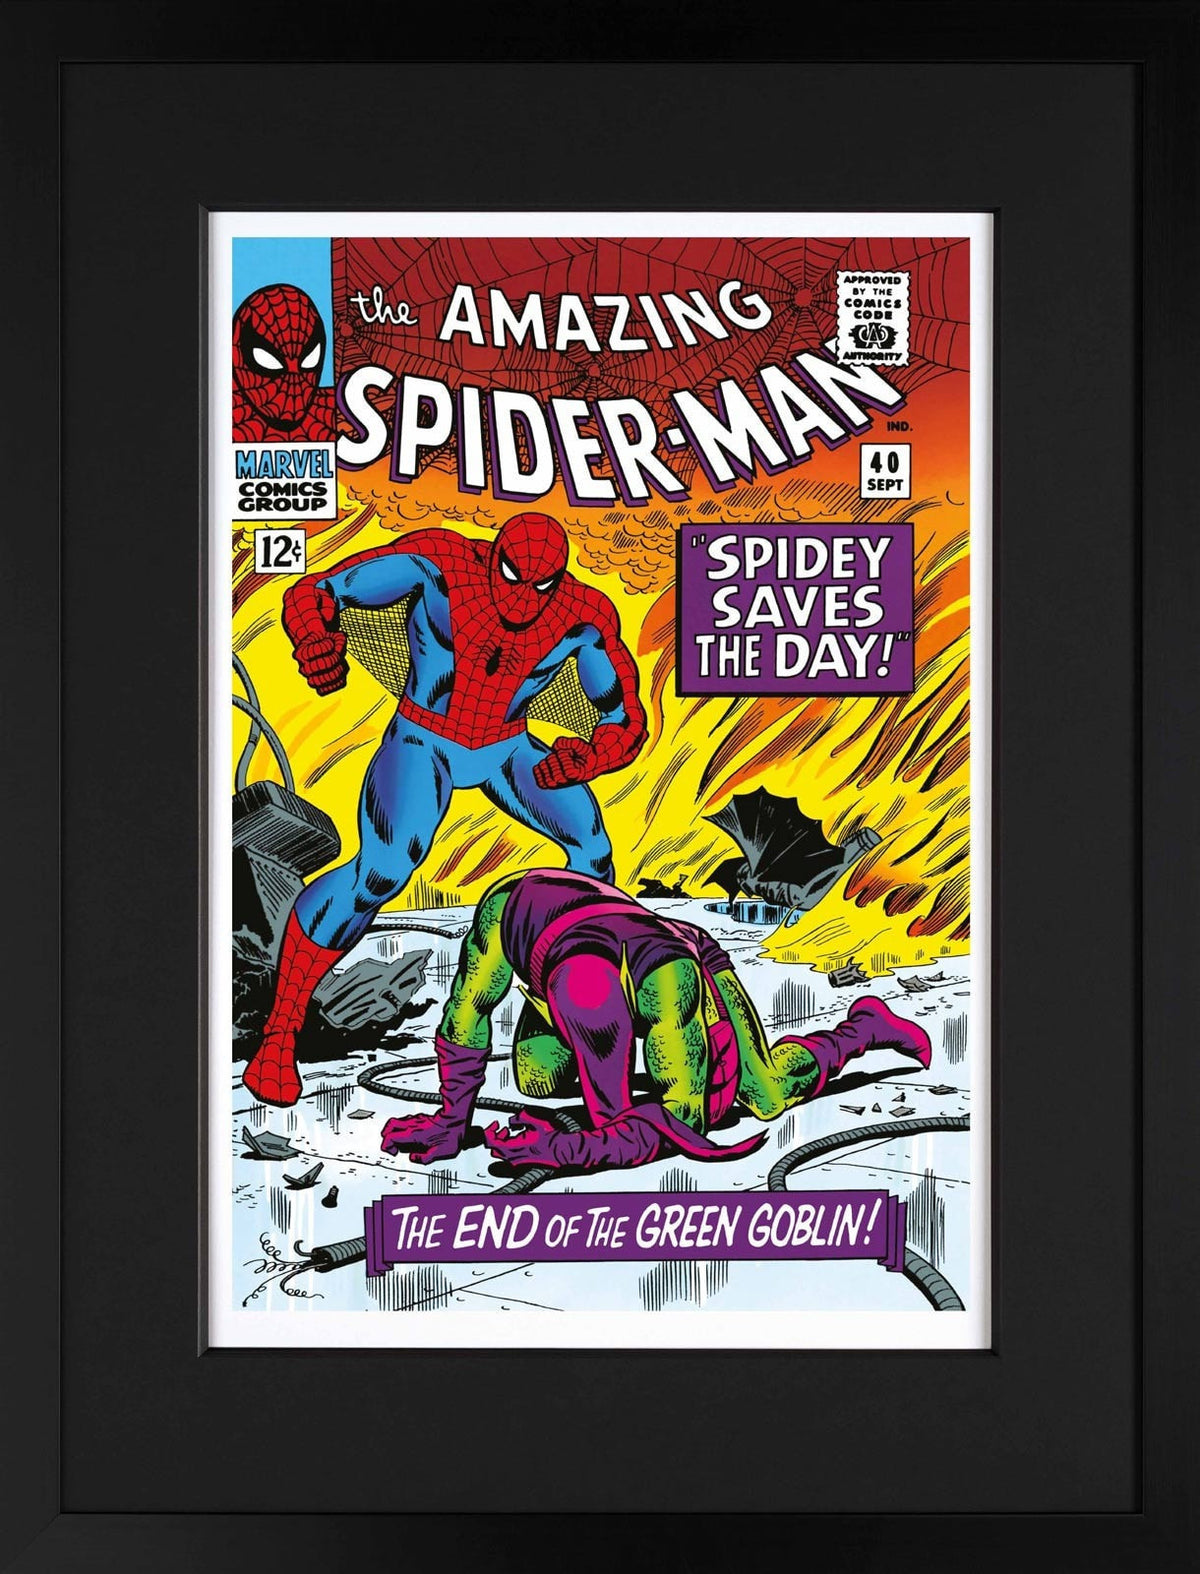 The Amazing Spider-Man #40 - Spidey Saves The Day Stan Lee